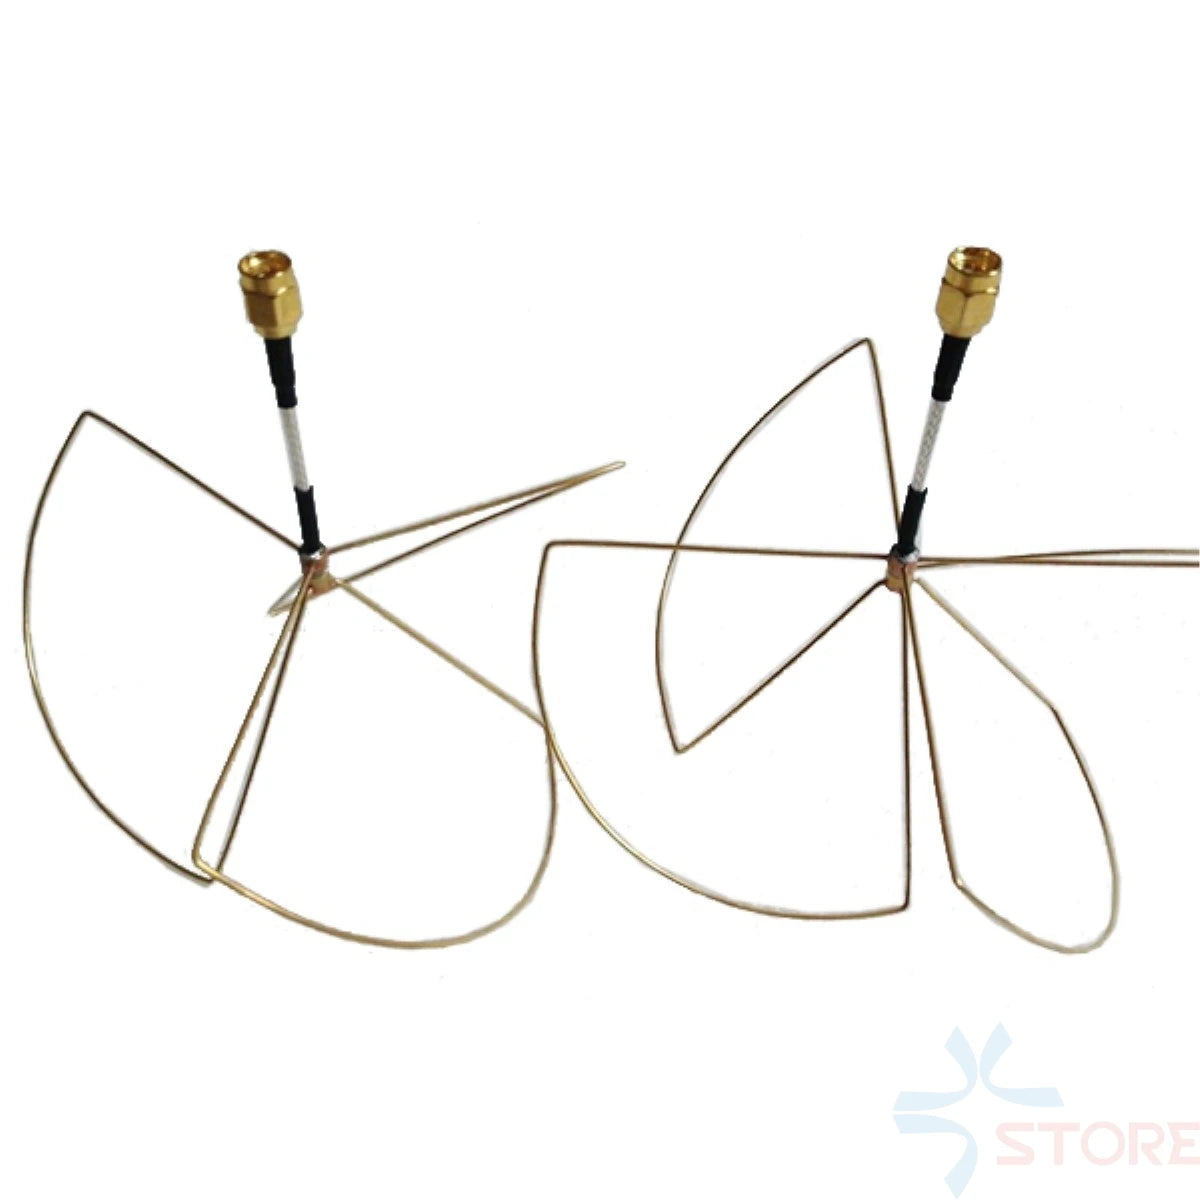 1.2G 1.2GHz Clover Leaf Antenna SPECIFICATIONS